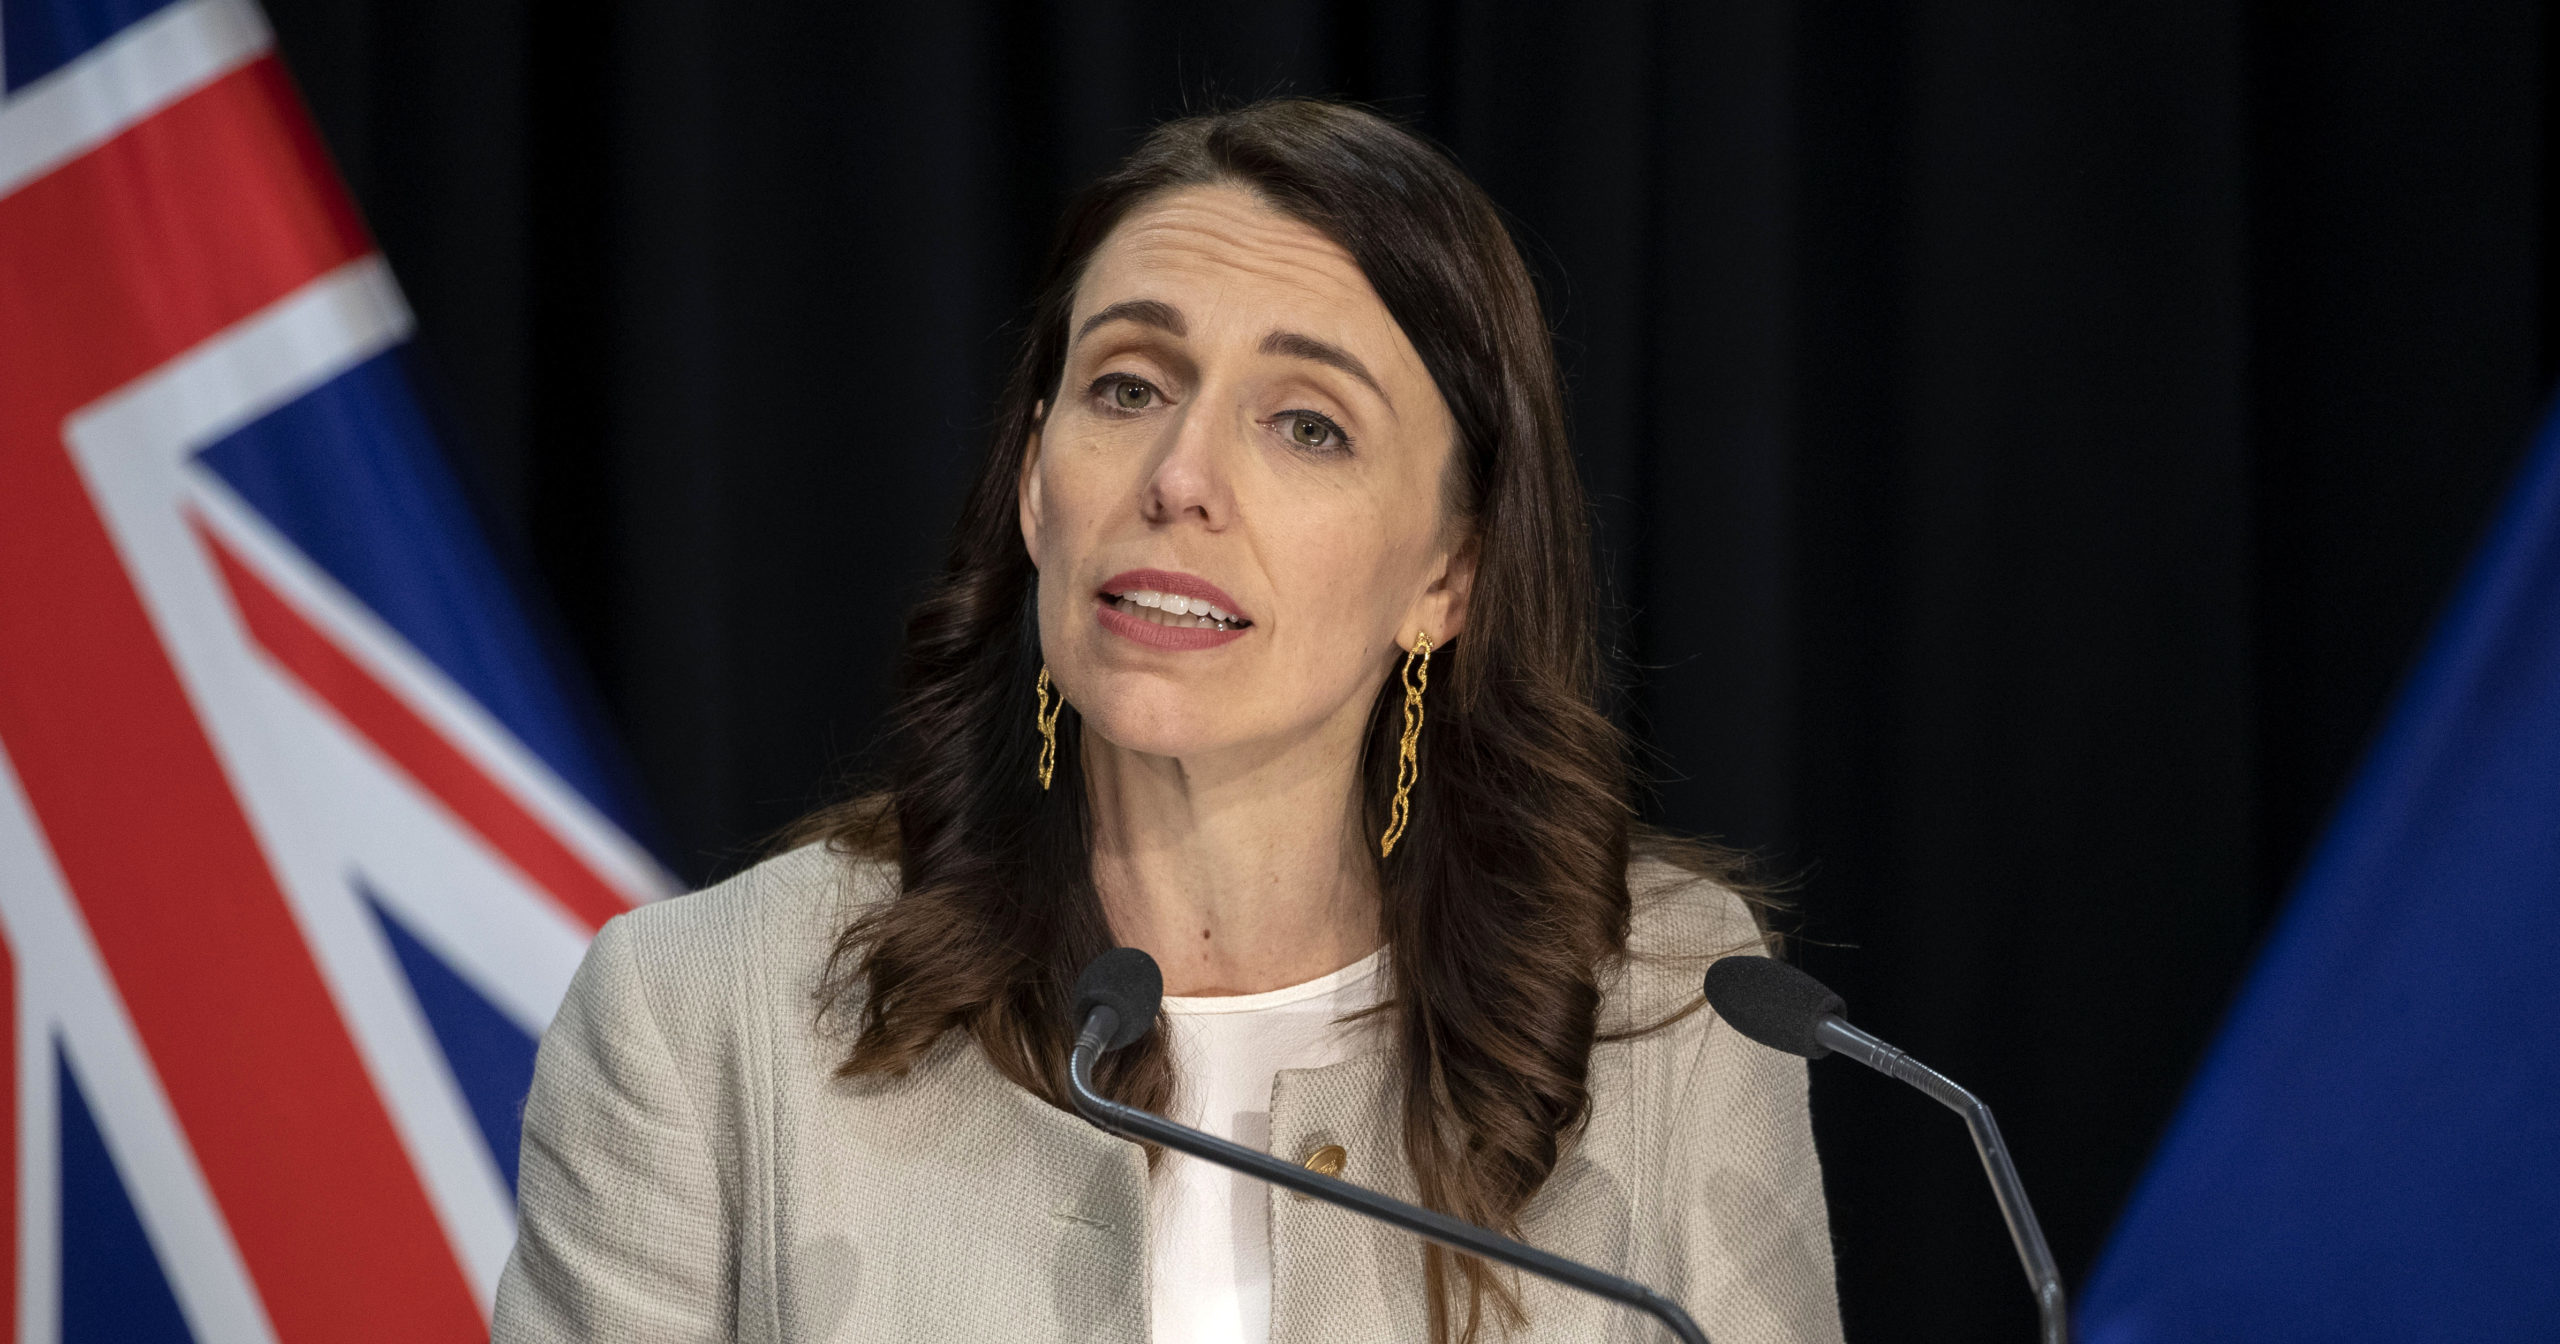 New Zealand Prime Minister Jacinda Ardern reacts during a news conference in Wellington, New Zealand, on Aug. 14, 2020.